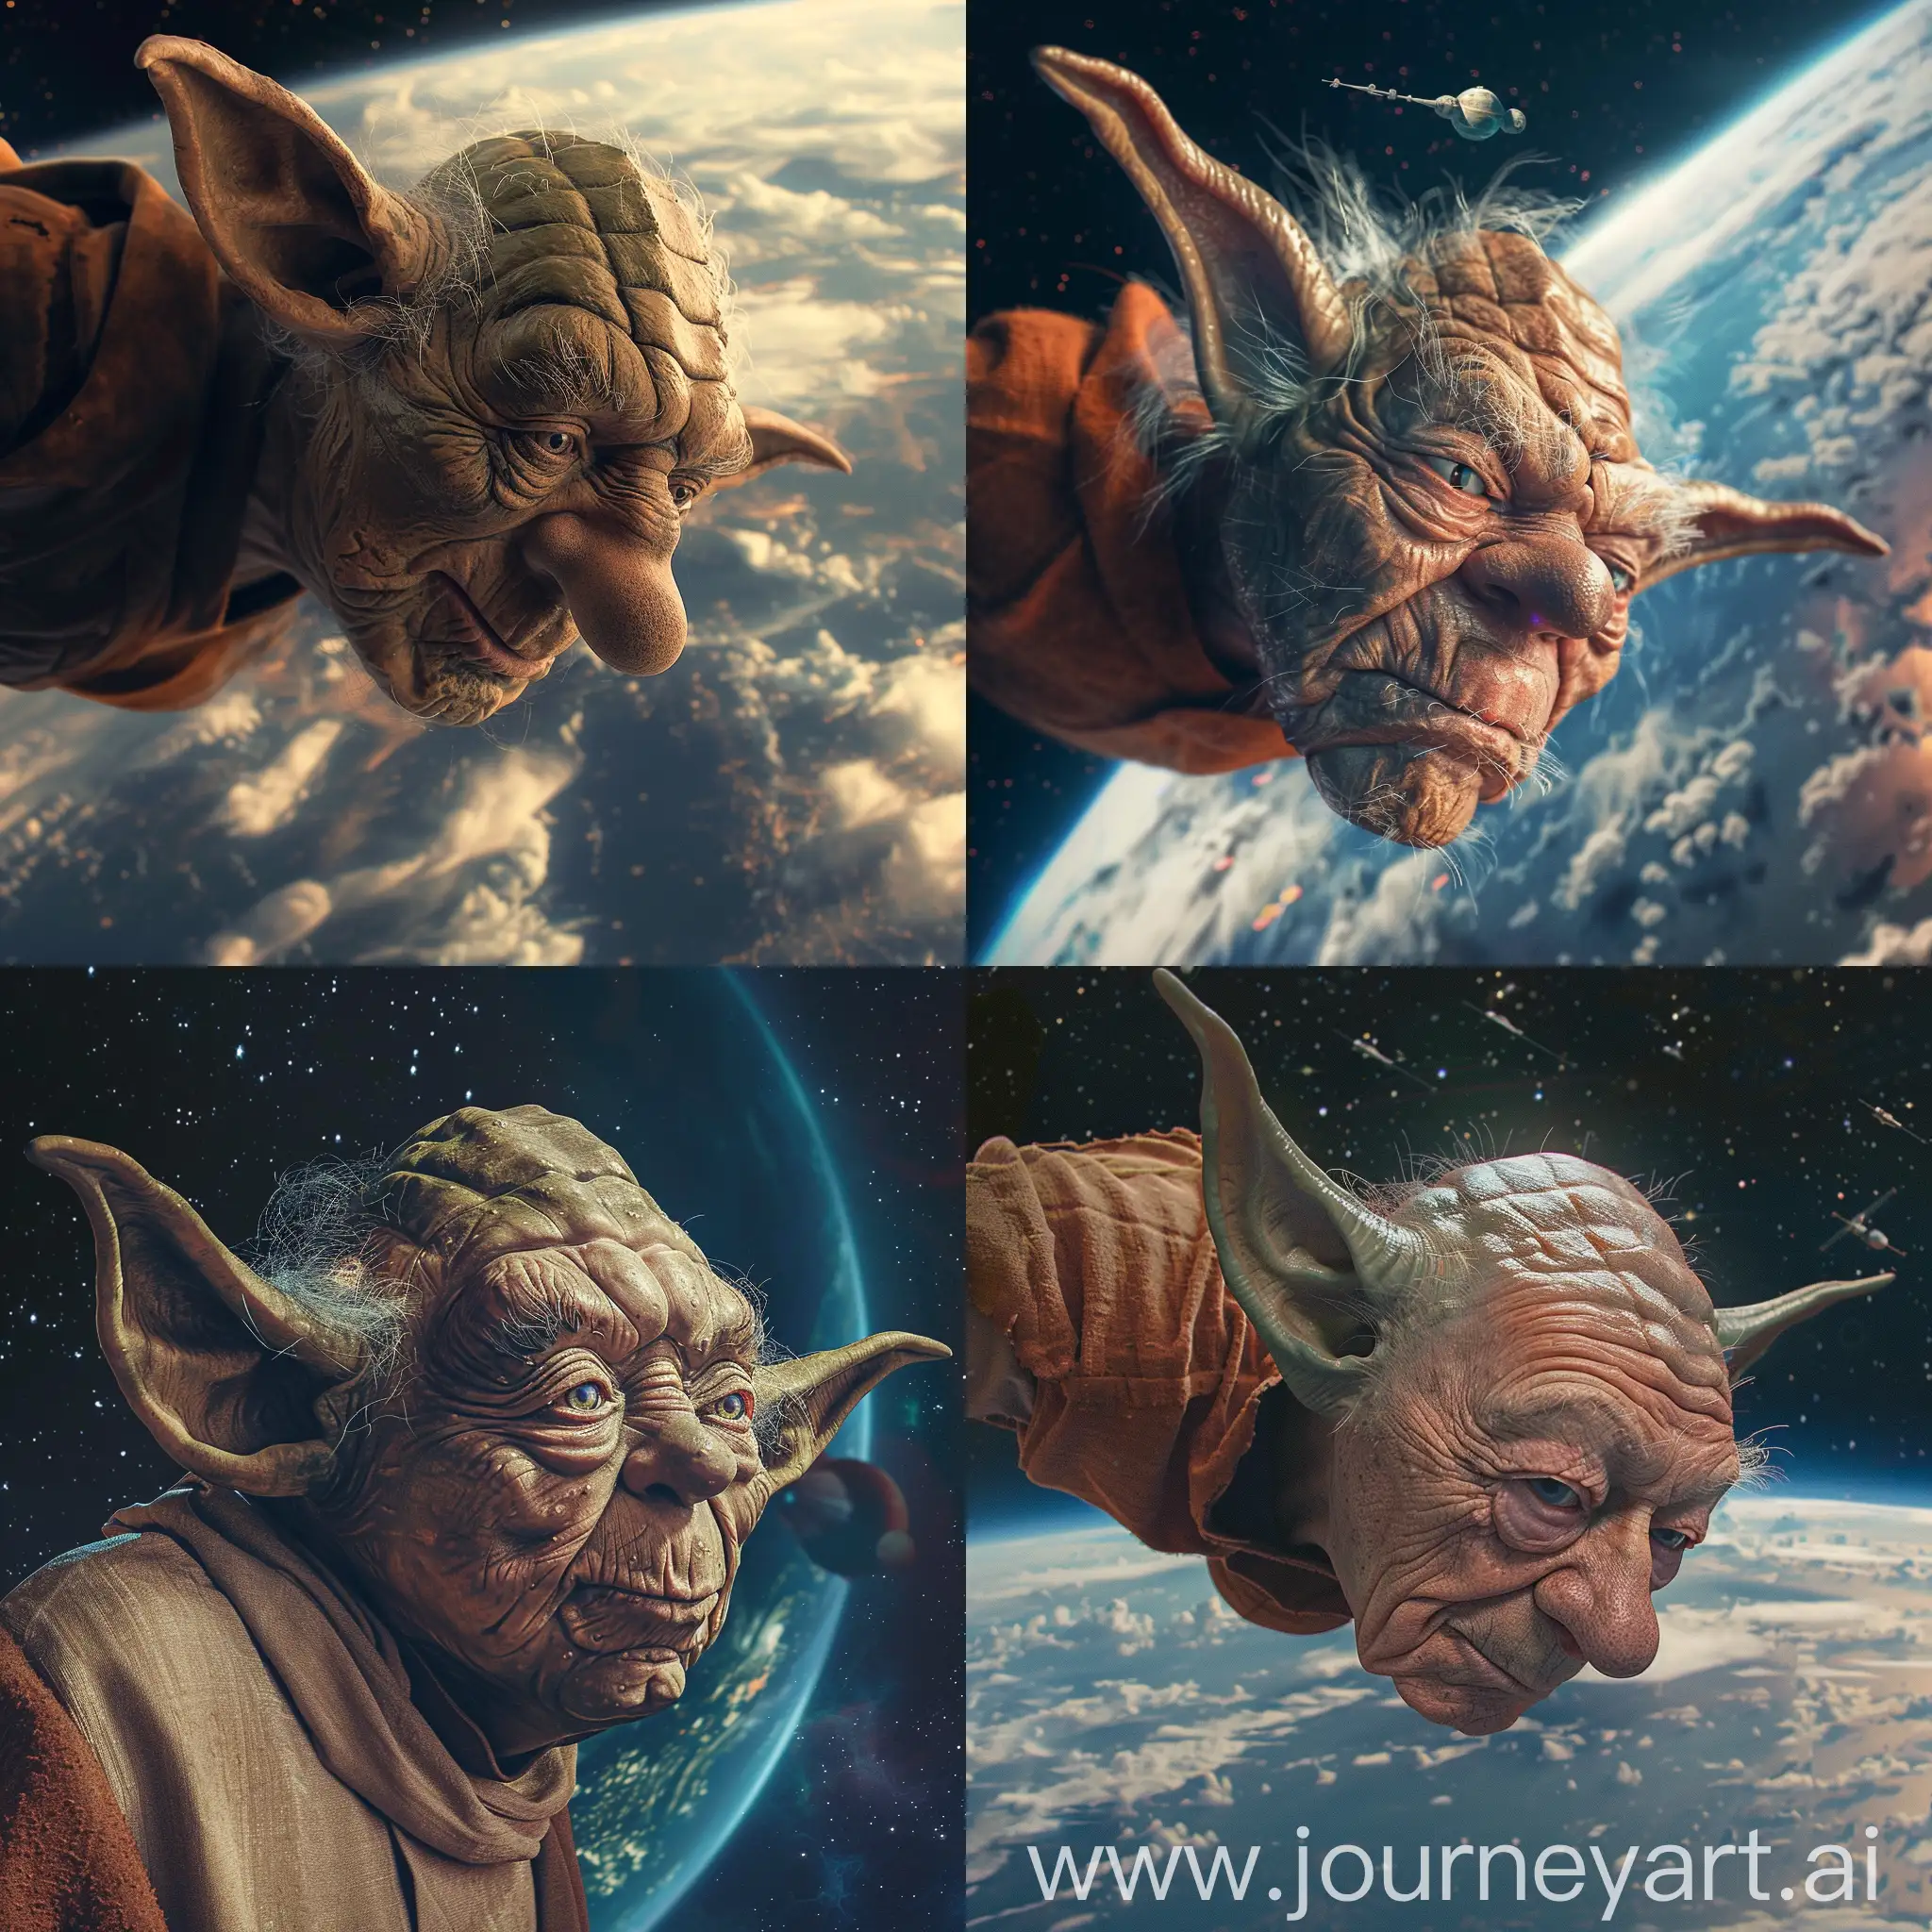 A 50 year old man with a big nose and looking like Yoda from Star Wars flying in space